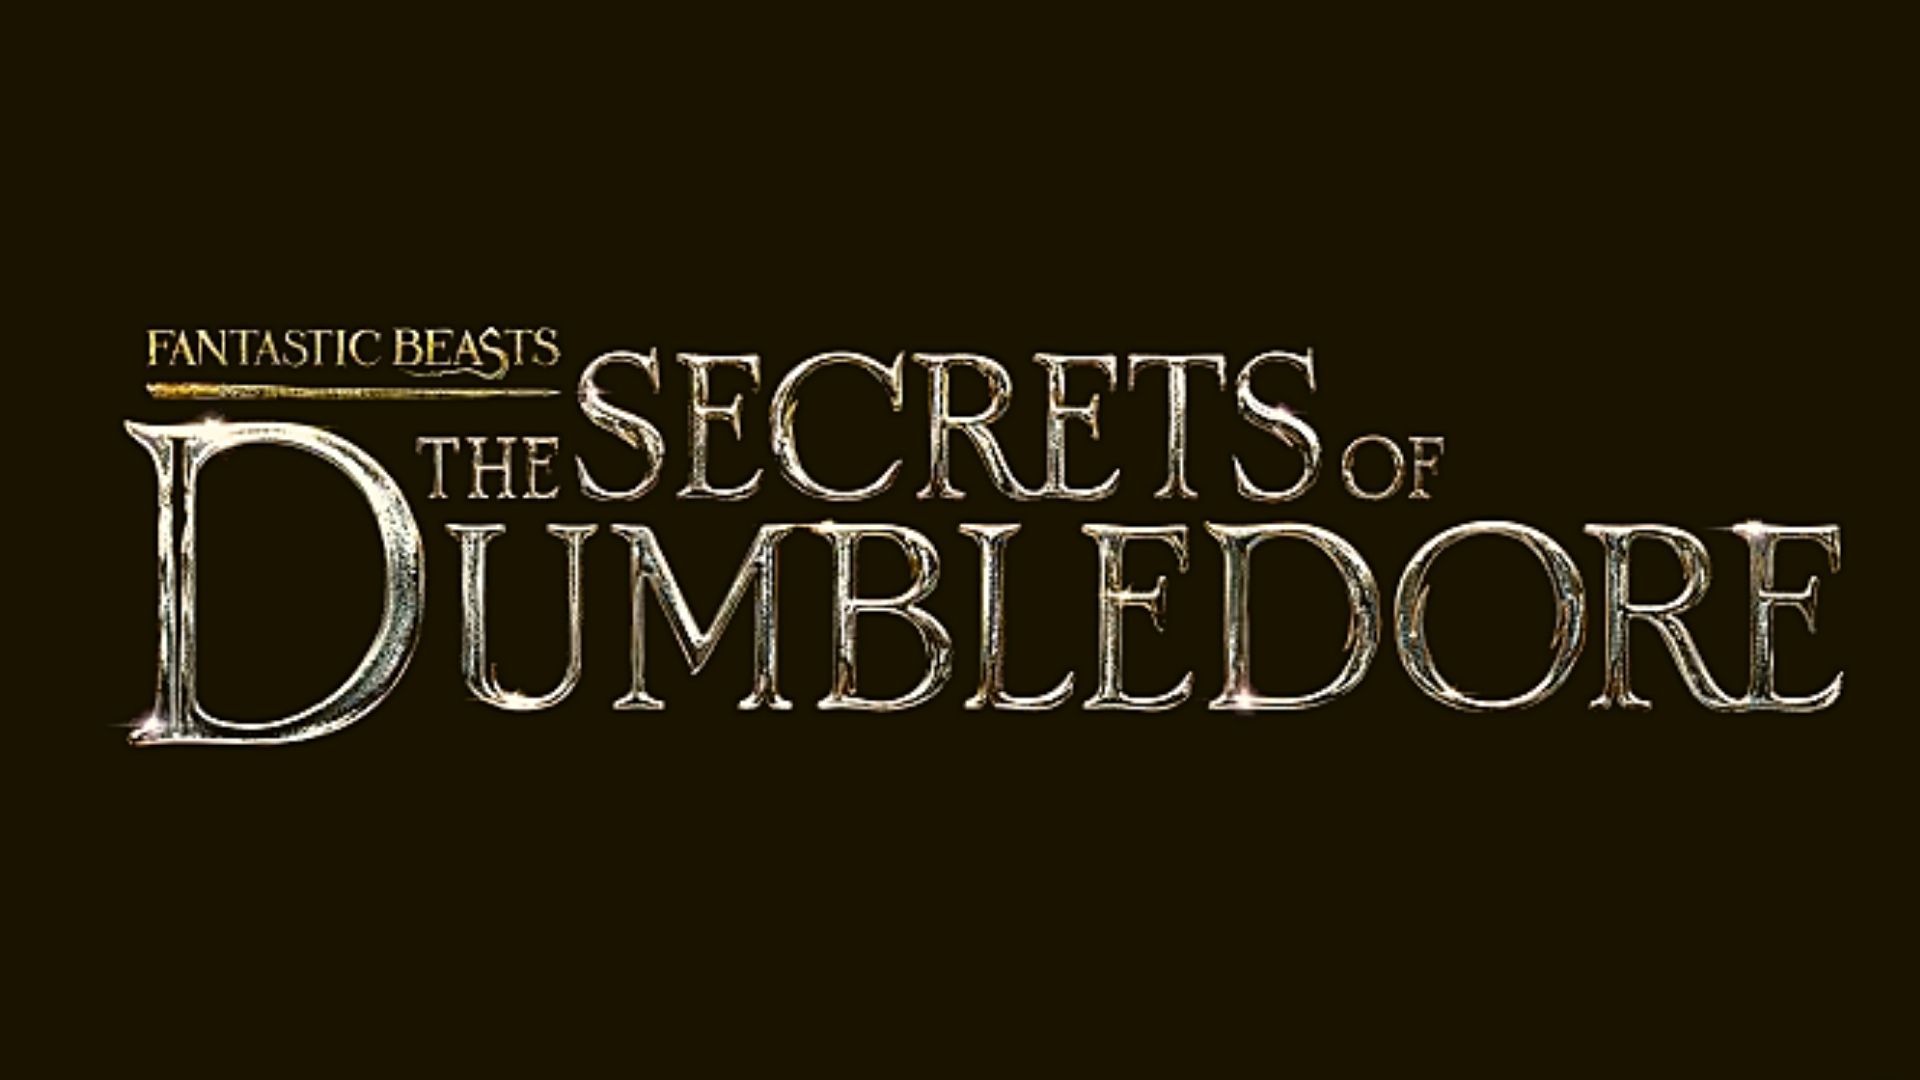 Fantastic Beasts: The Secrets of Dumbledore Parents Guide and Age Rating